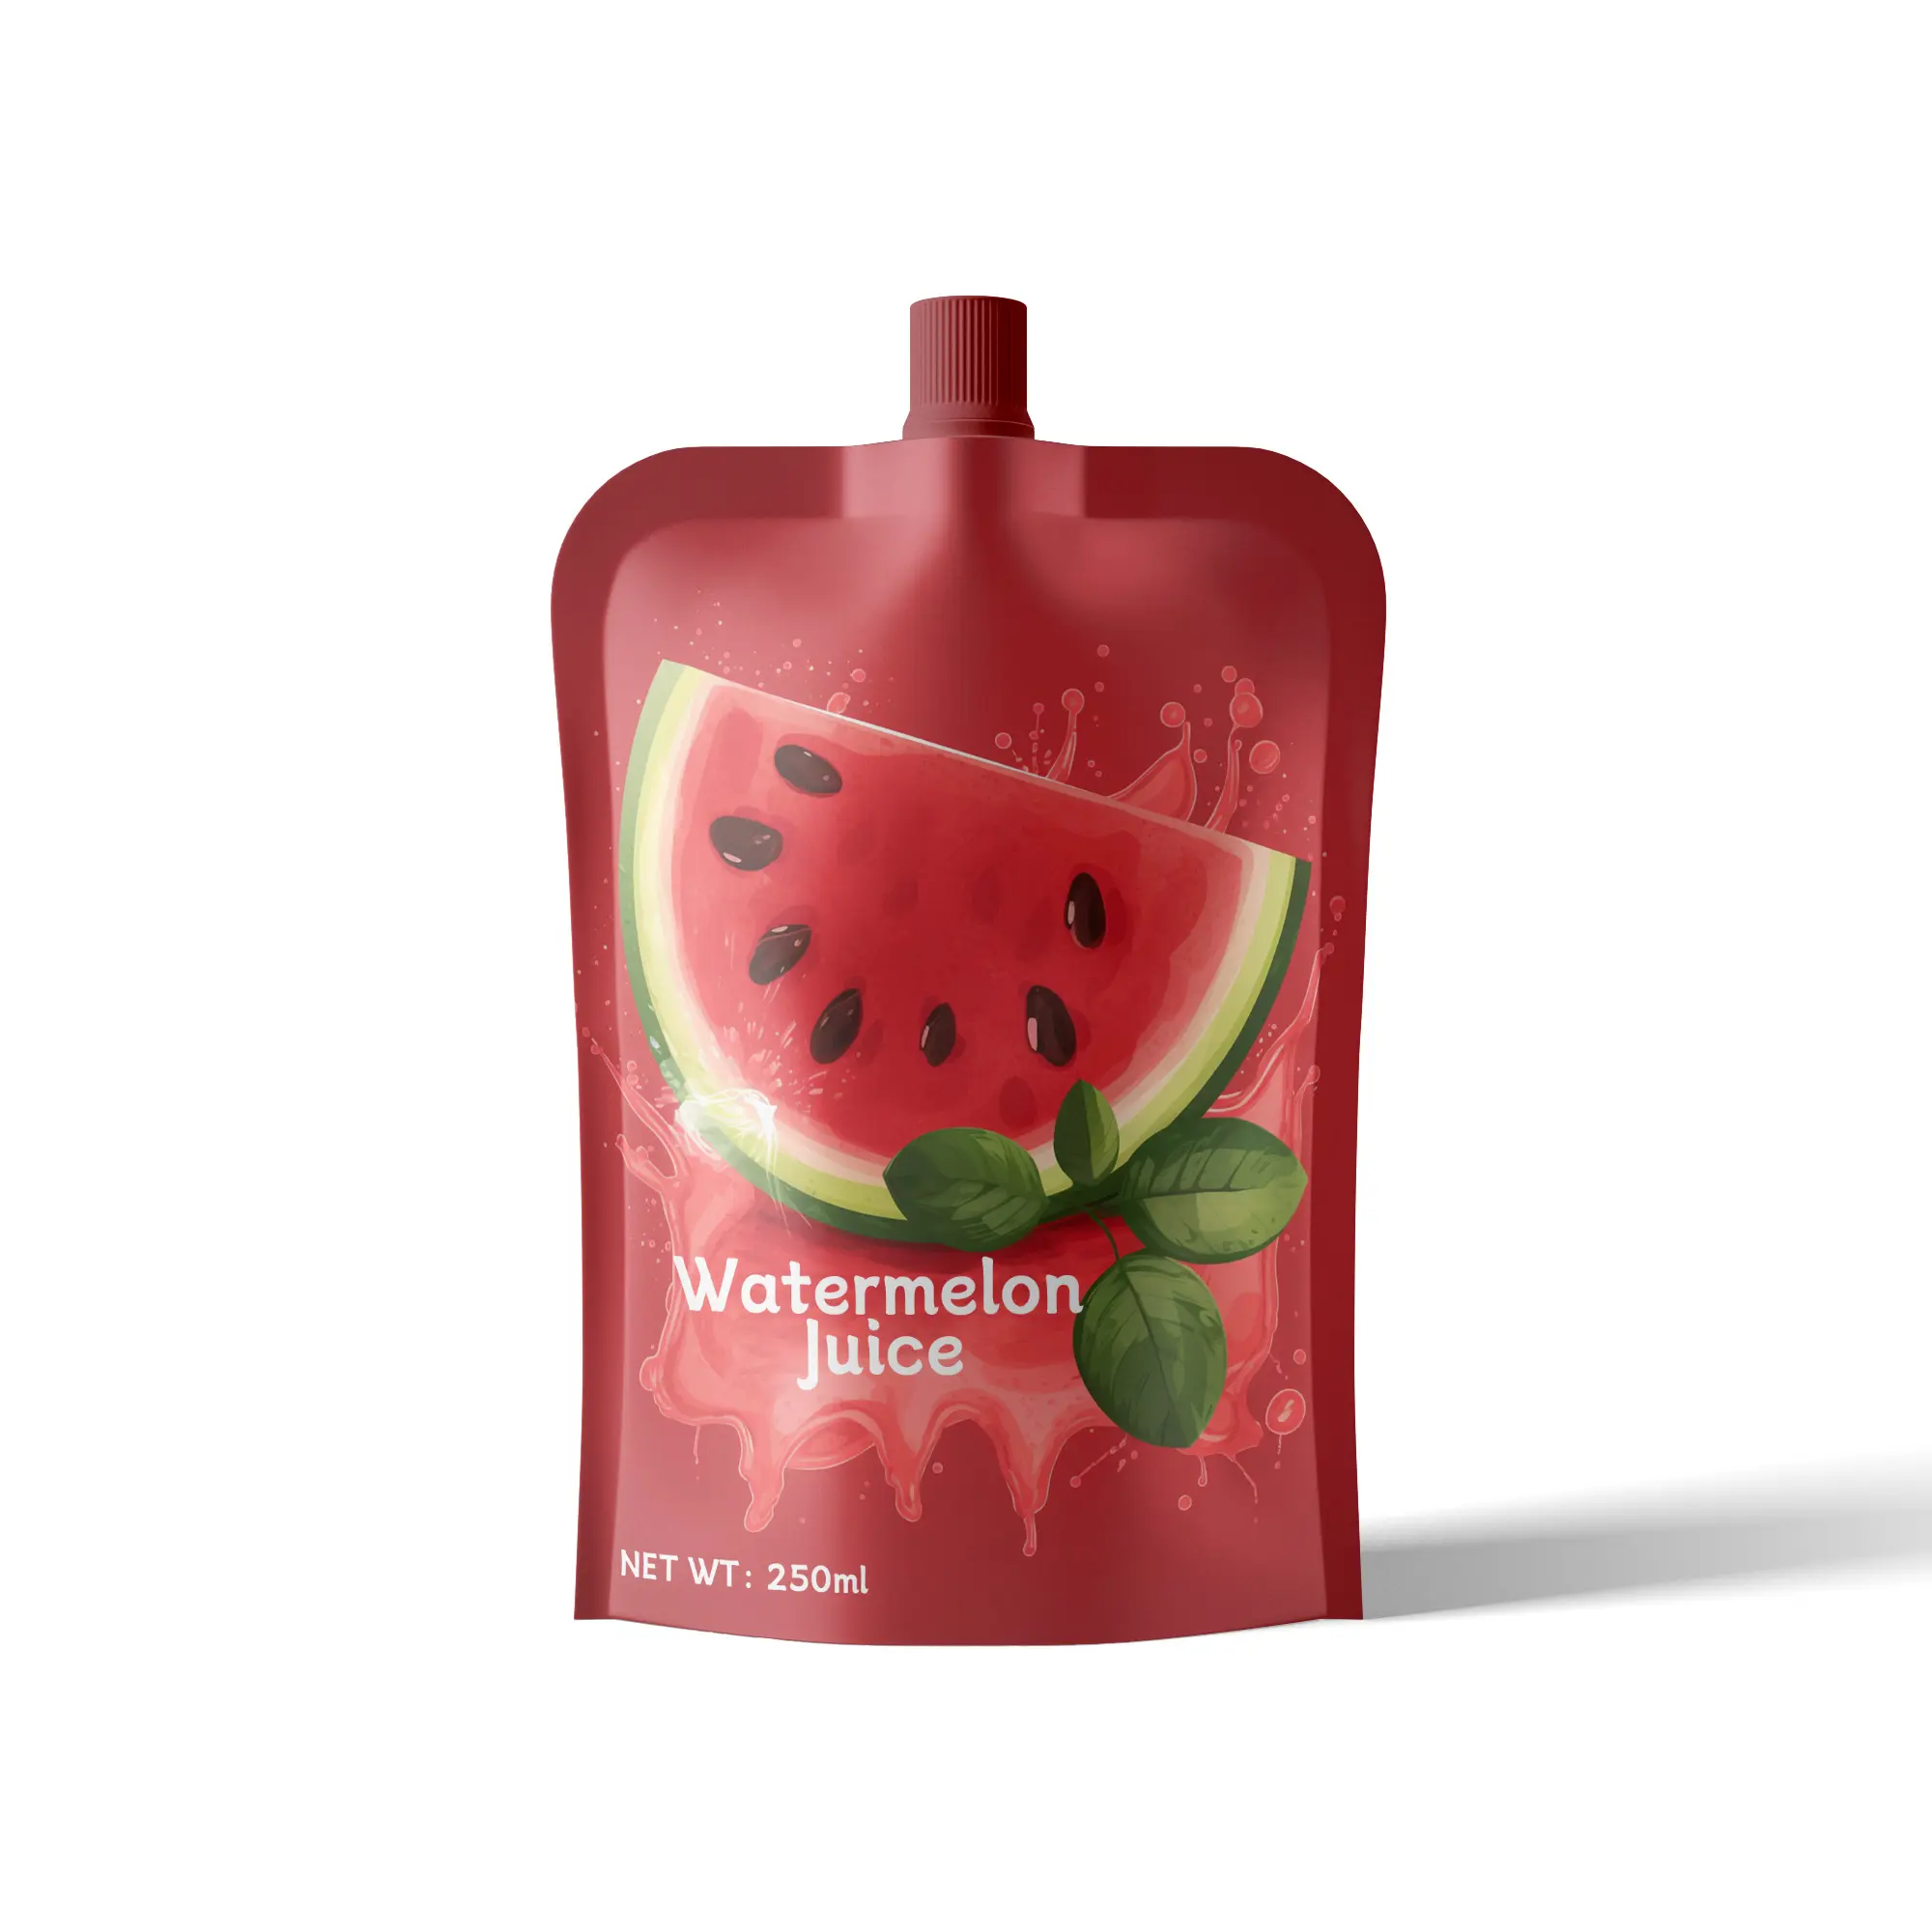 A watermelon pattern printed on the spout pouch